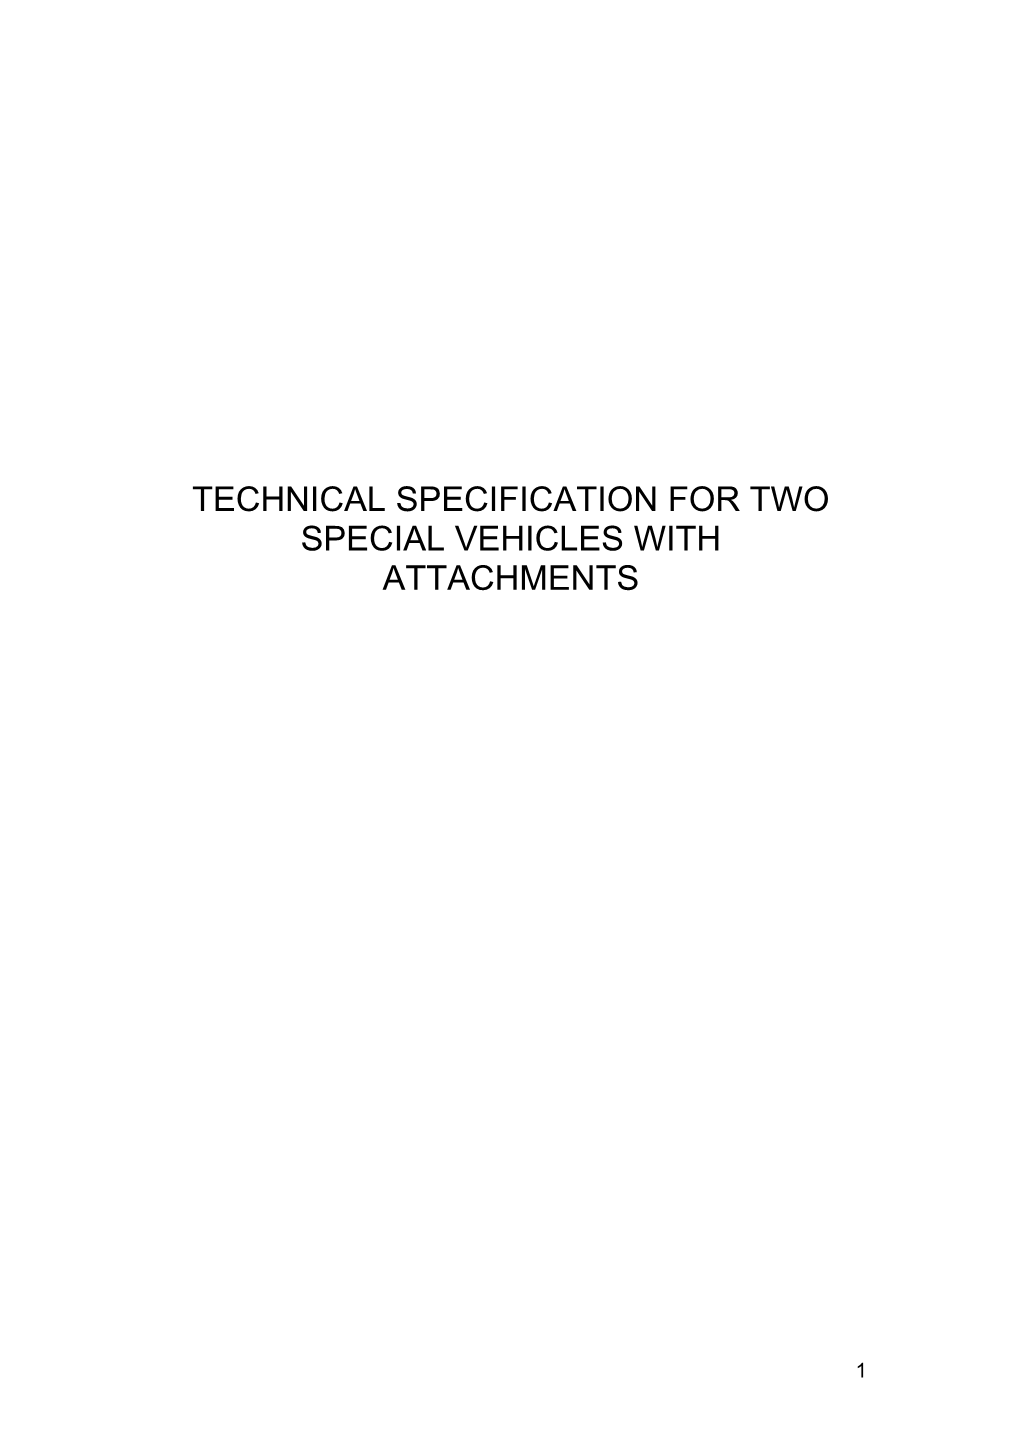 Technical Specification for Two